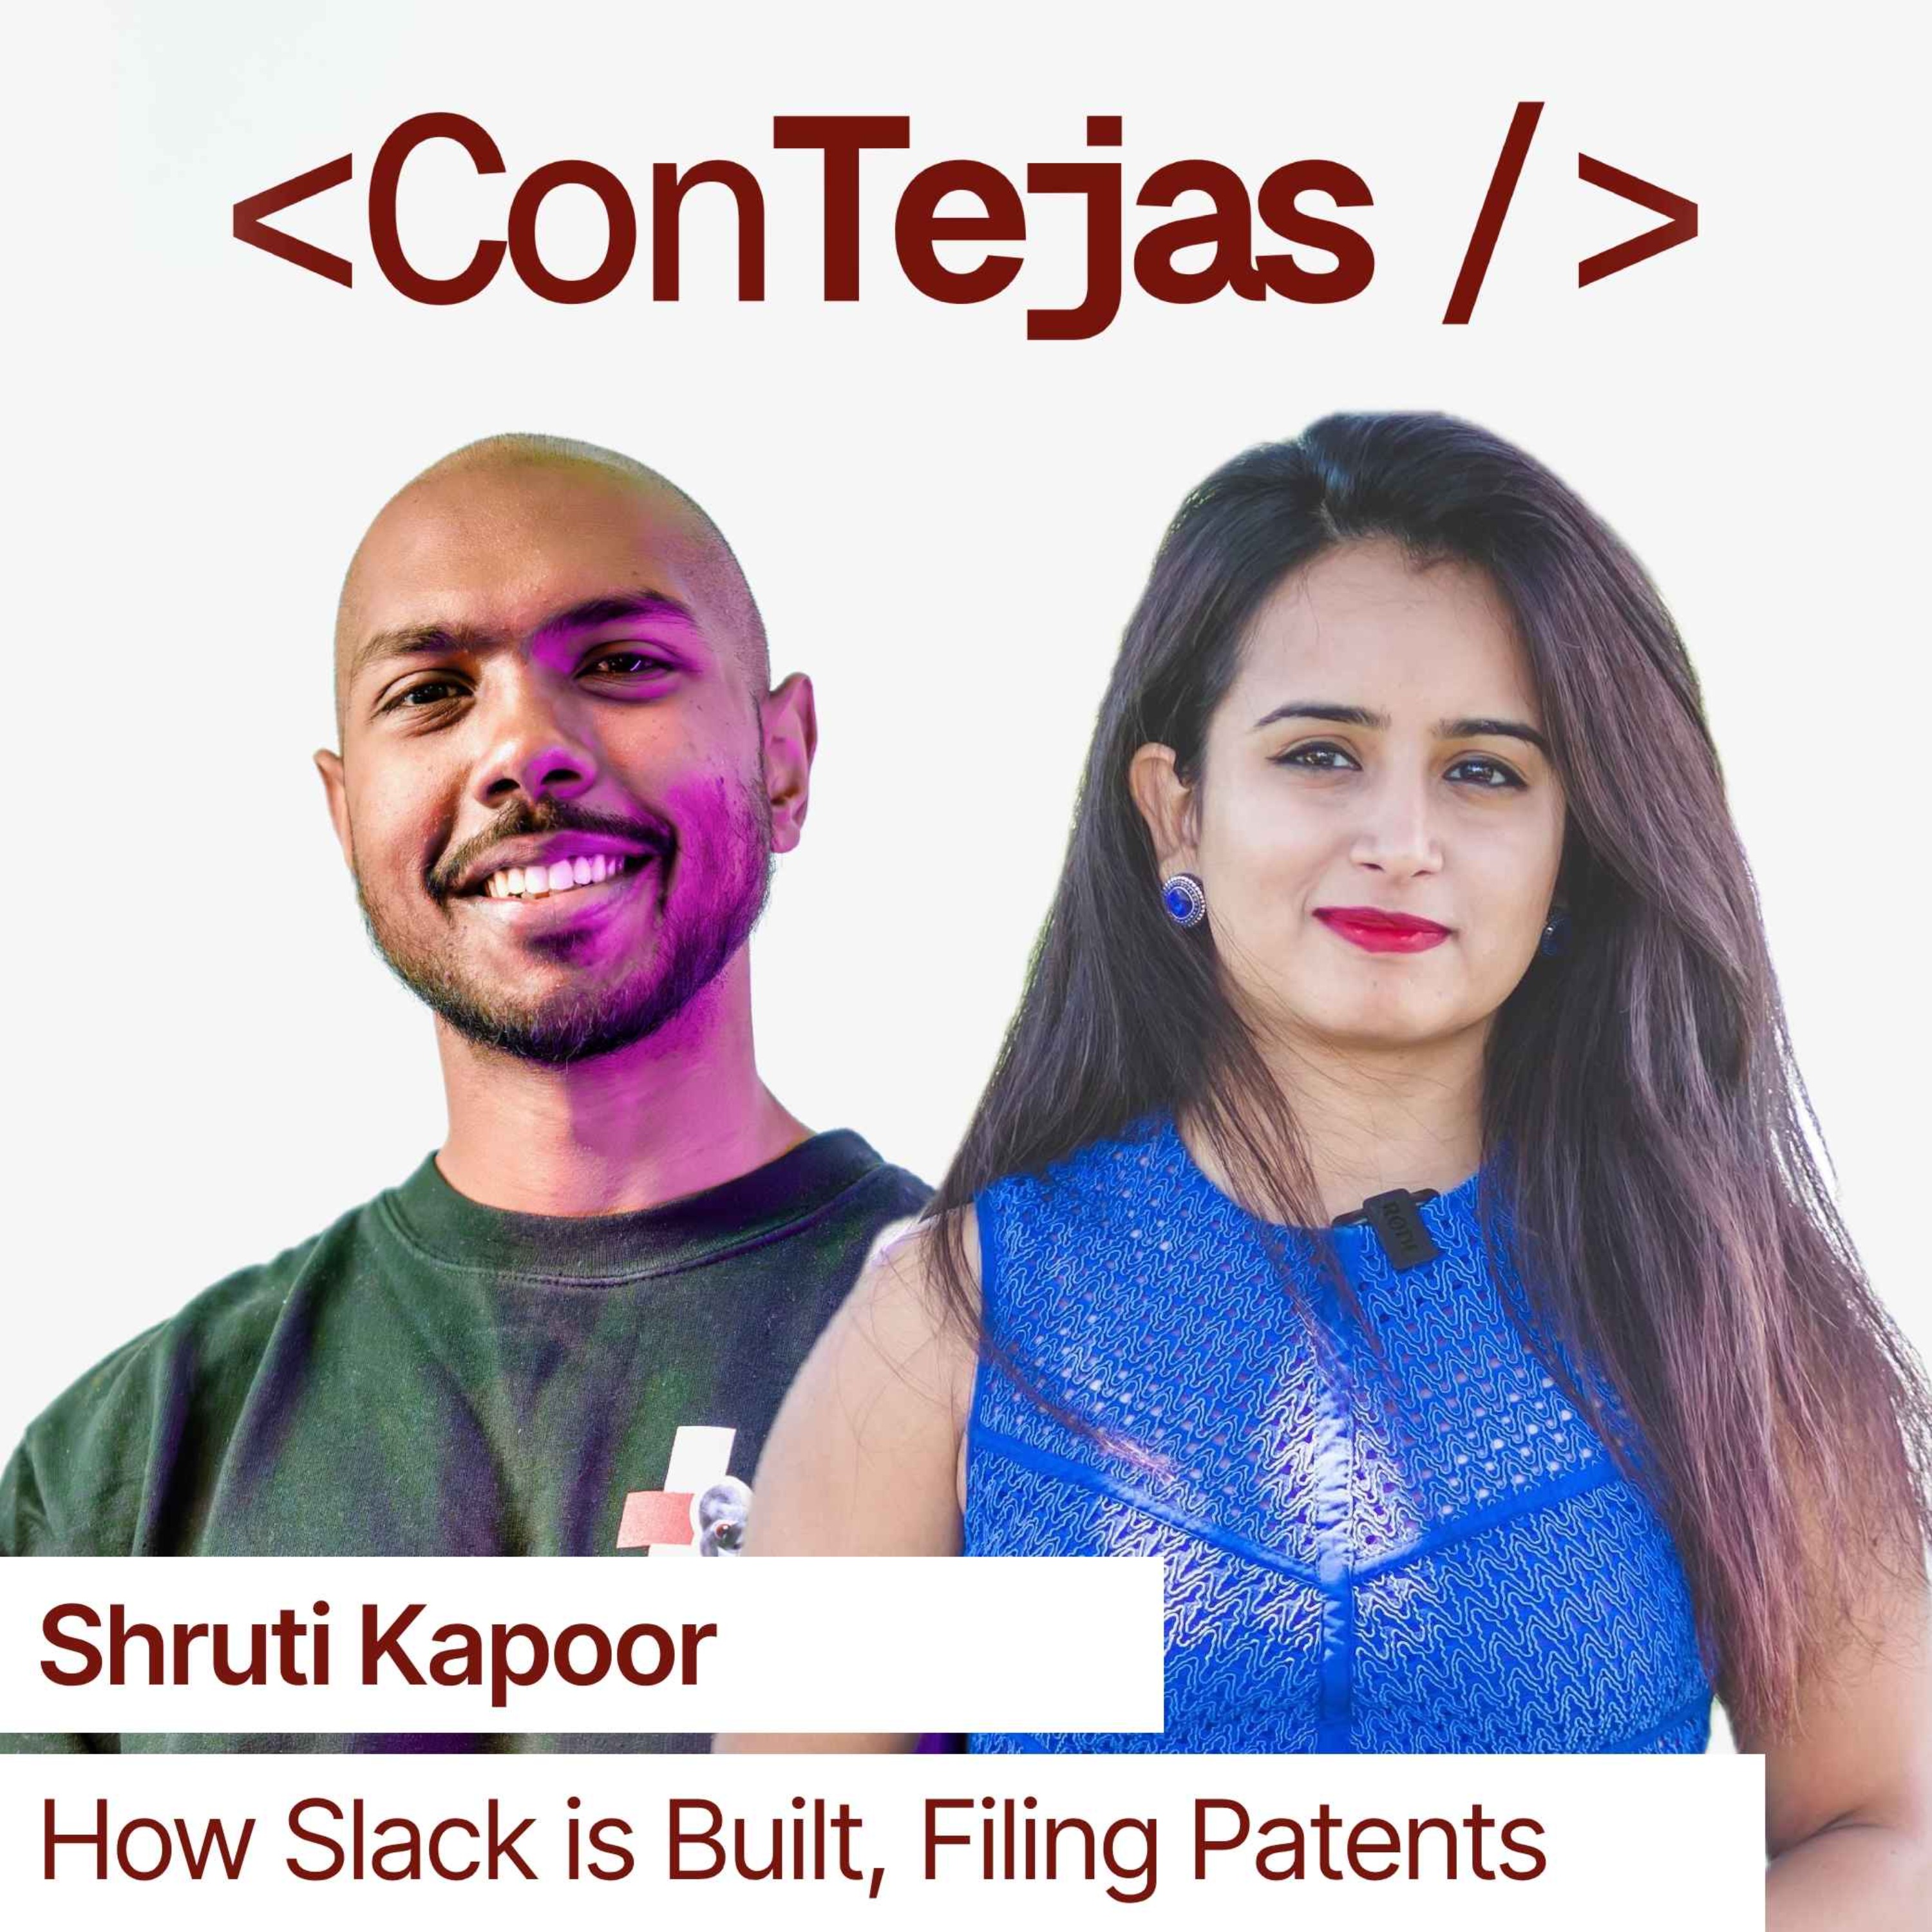 Shruti Kapoor: How Slack is Built and Tested, How Patents are Filed